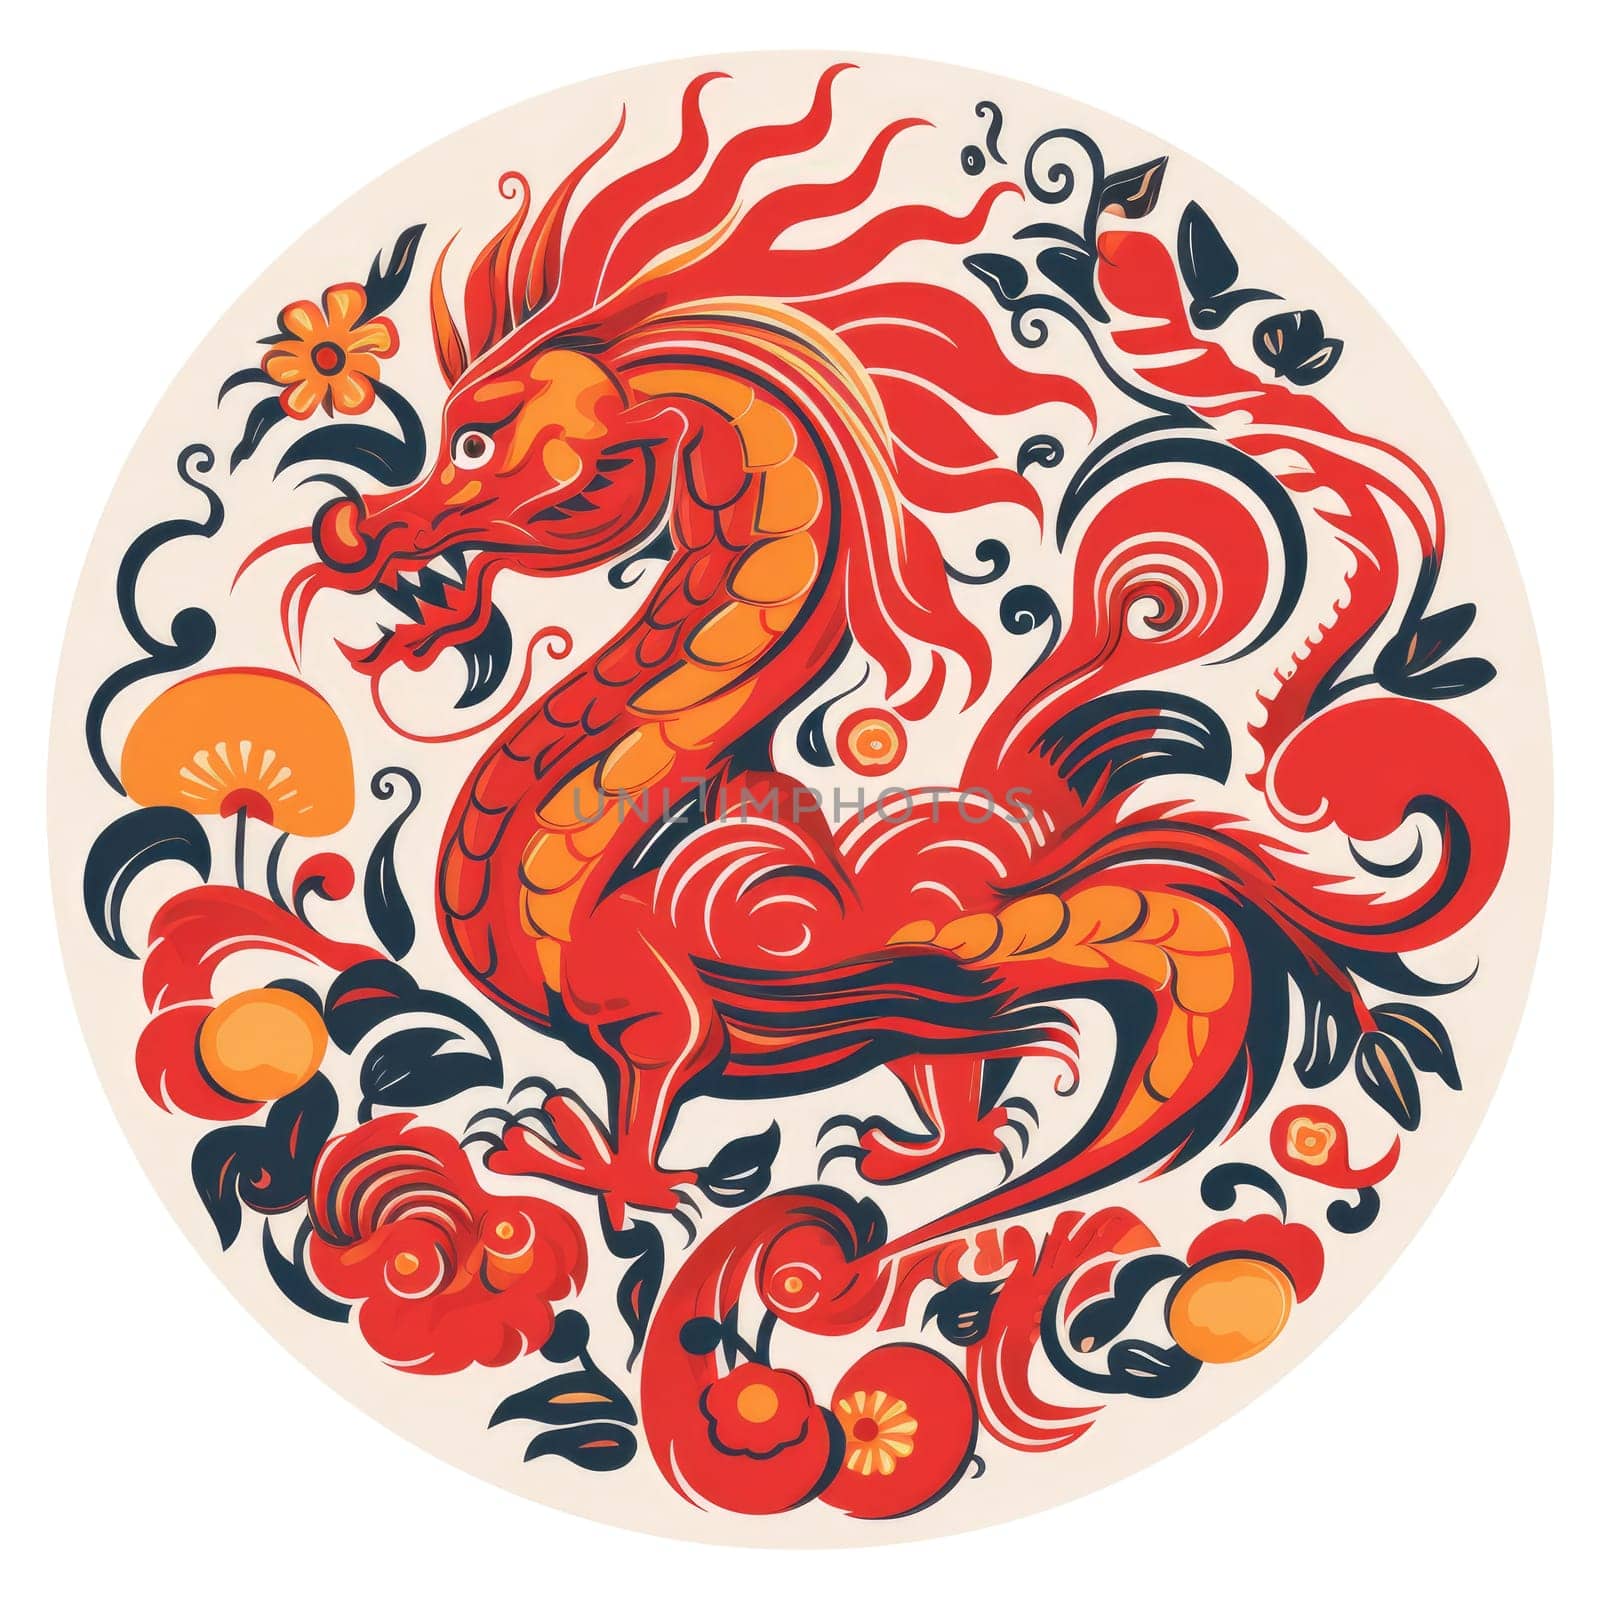 Illustration of Chinese dragon with floral bright patterns on a white background by natali_brill